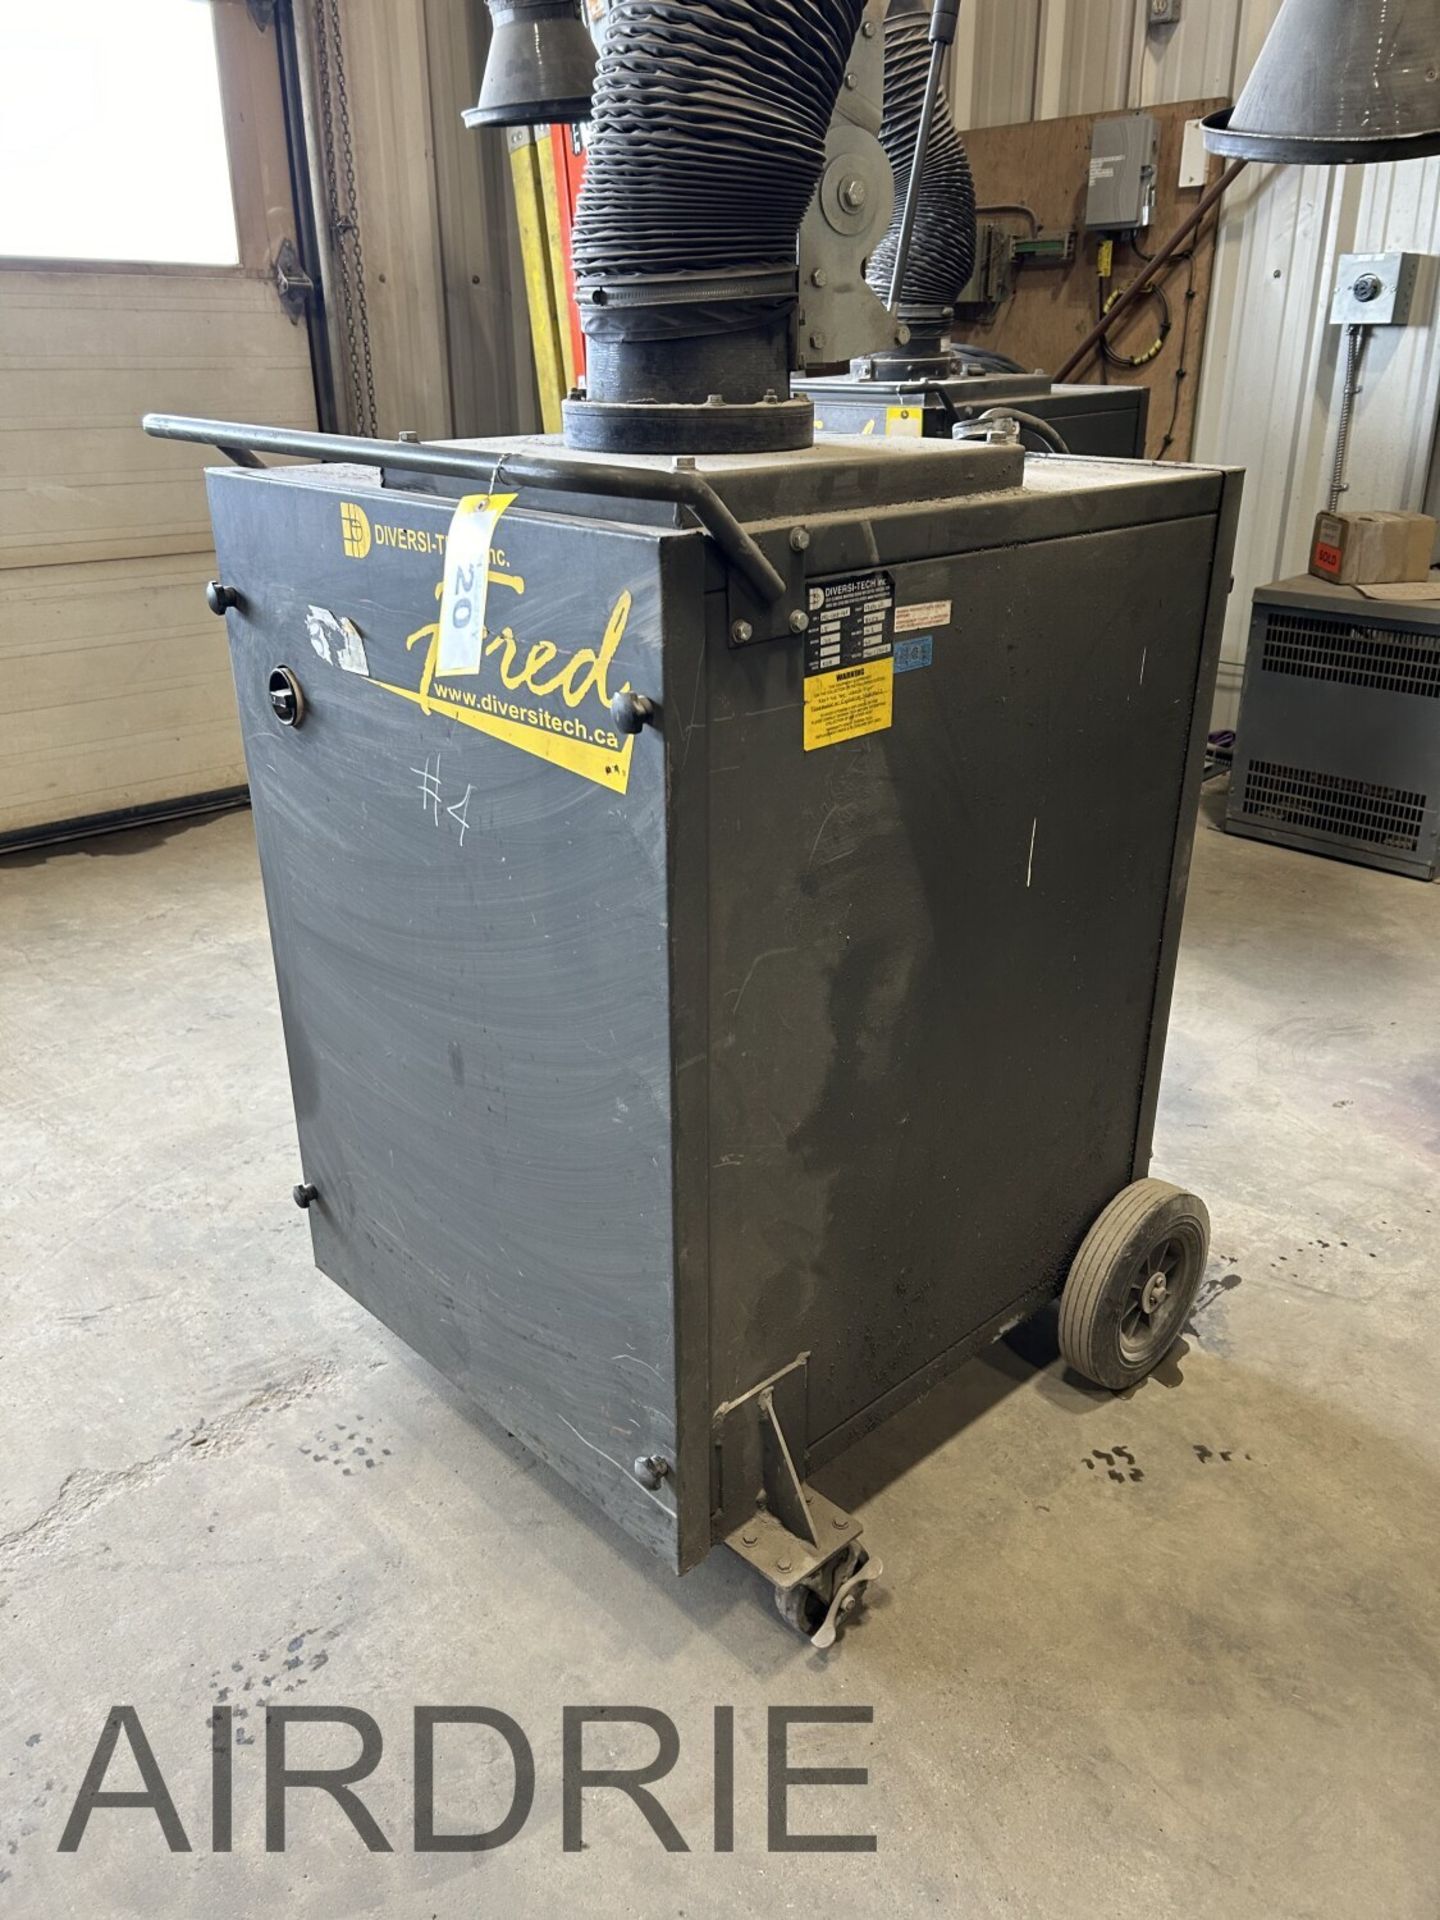 *OFFSITE* DIVERSI-TECH FRED SMOKE AND FUME EXTRACTOR, MOD. FREDJR, S/N FRJ-1203-1164 - Image 4 of 8